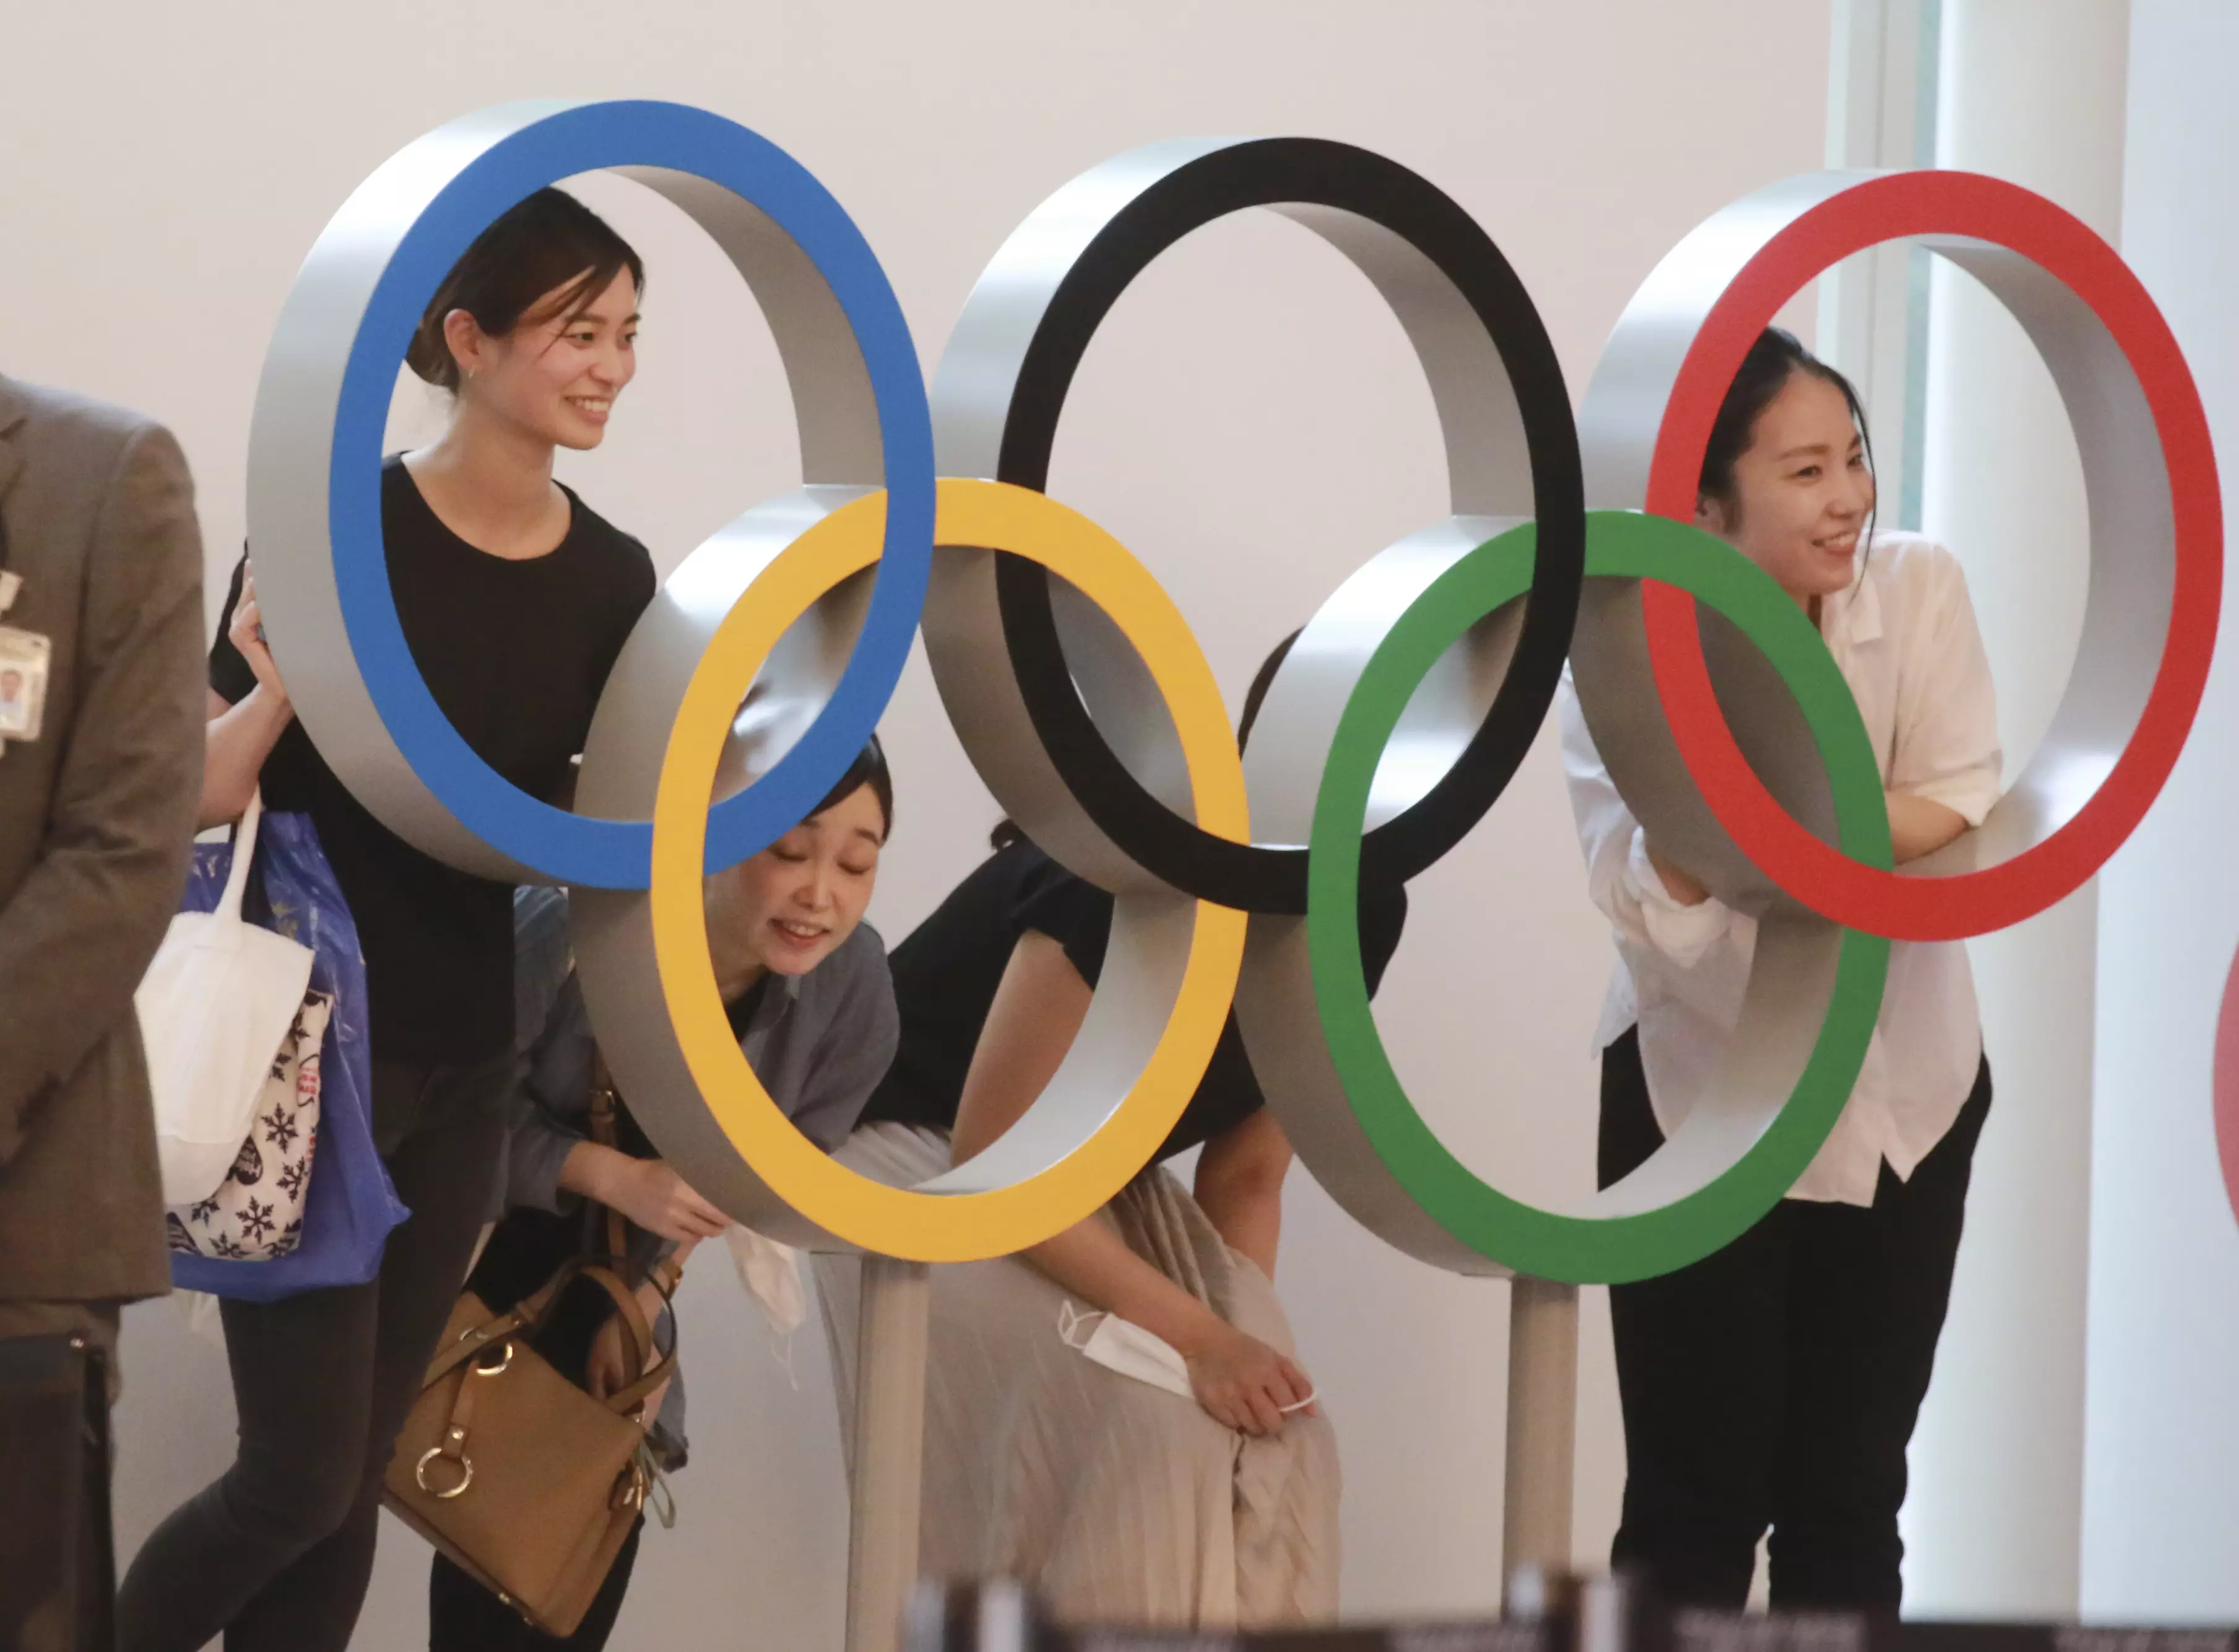 Spectators pose for photo with the Olympics Rings display at Haneda International Airport in Tokyo (